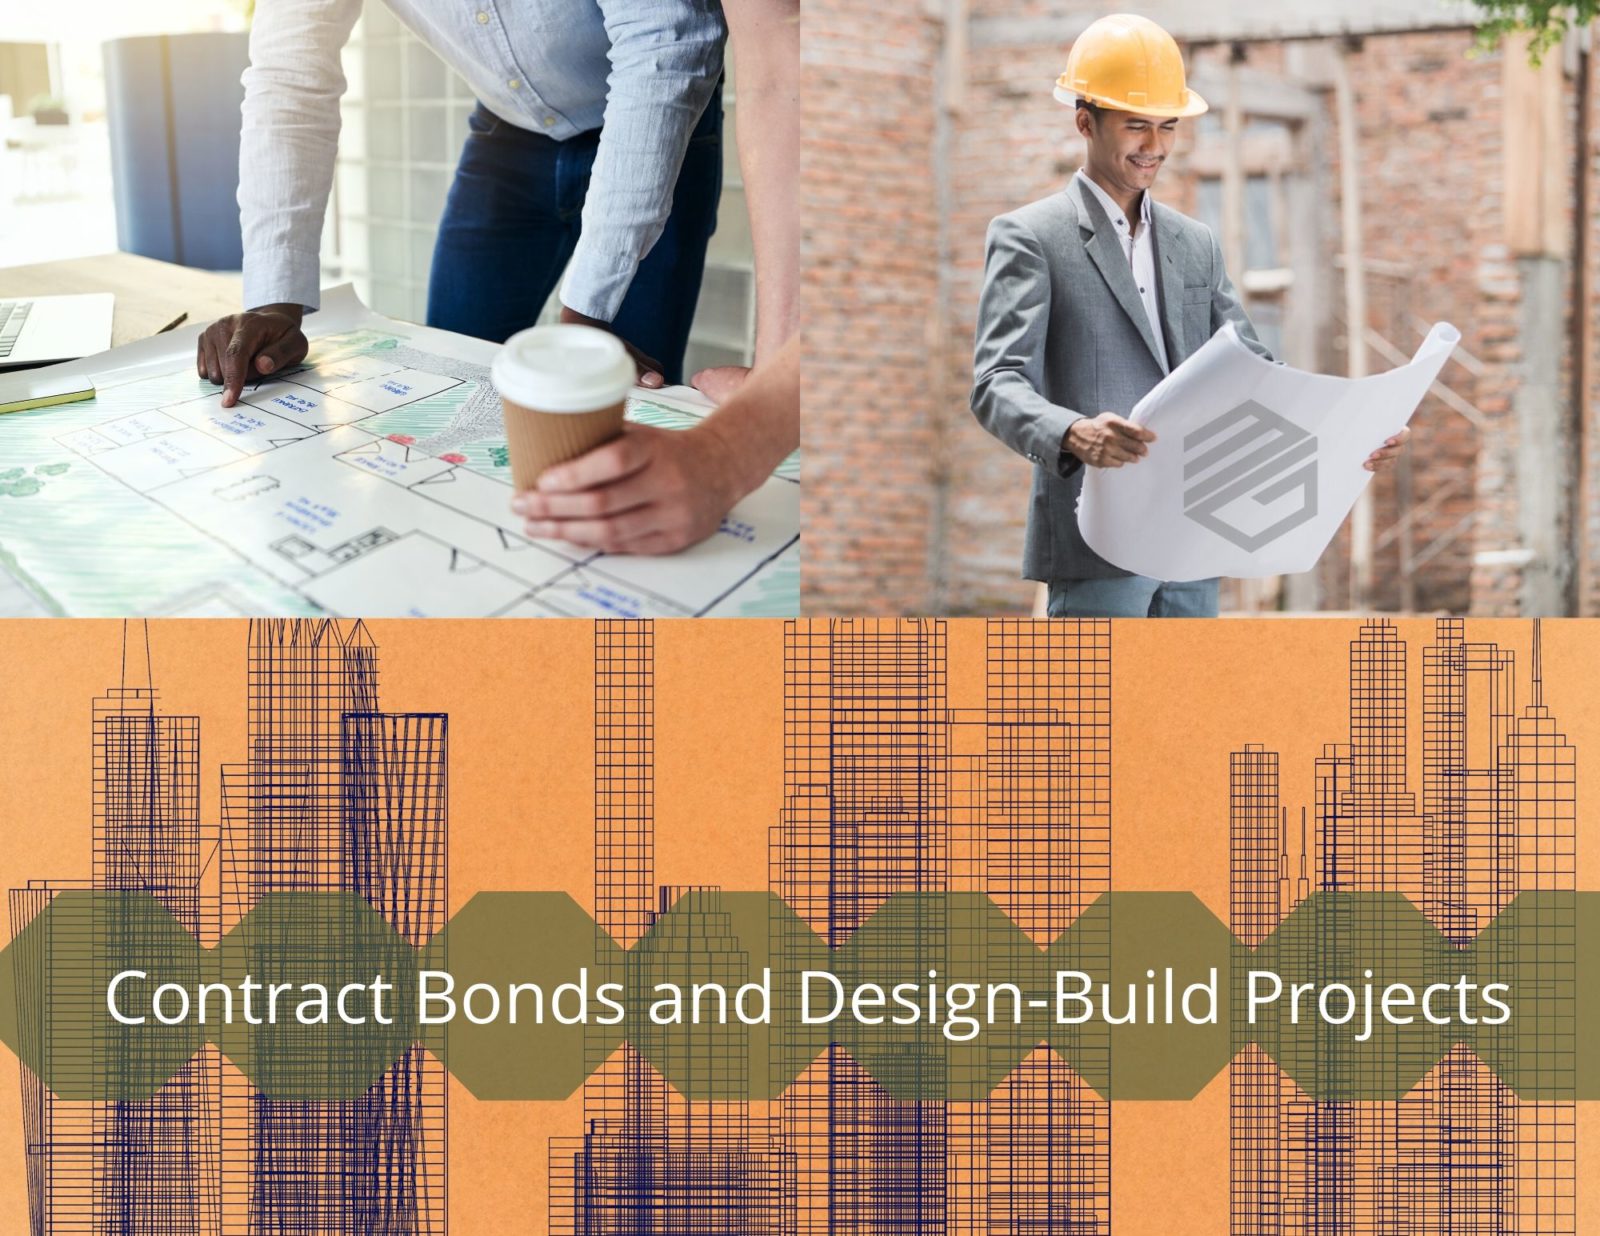 Contract Bonds and Design Build Projects - The has 3 images. One of a contractor looking at blueprints, another of two people studying construction plans and at the bottom there are buildings drawn with pencil on an orange background. Green hexagons hold the whilte letters that say, " Contract Bonds and Design Build Projects"